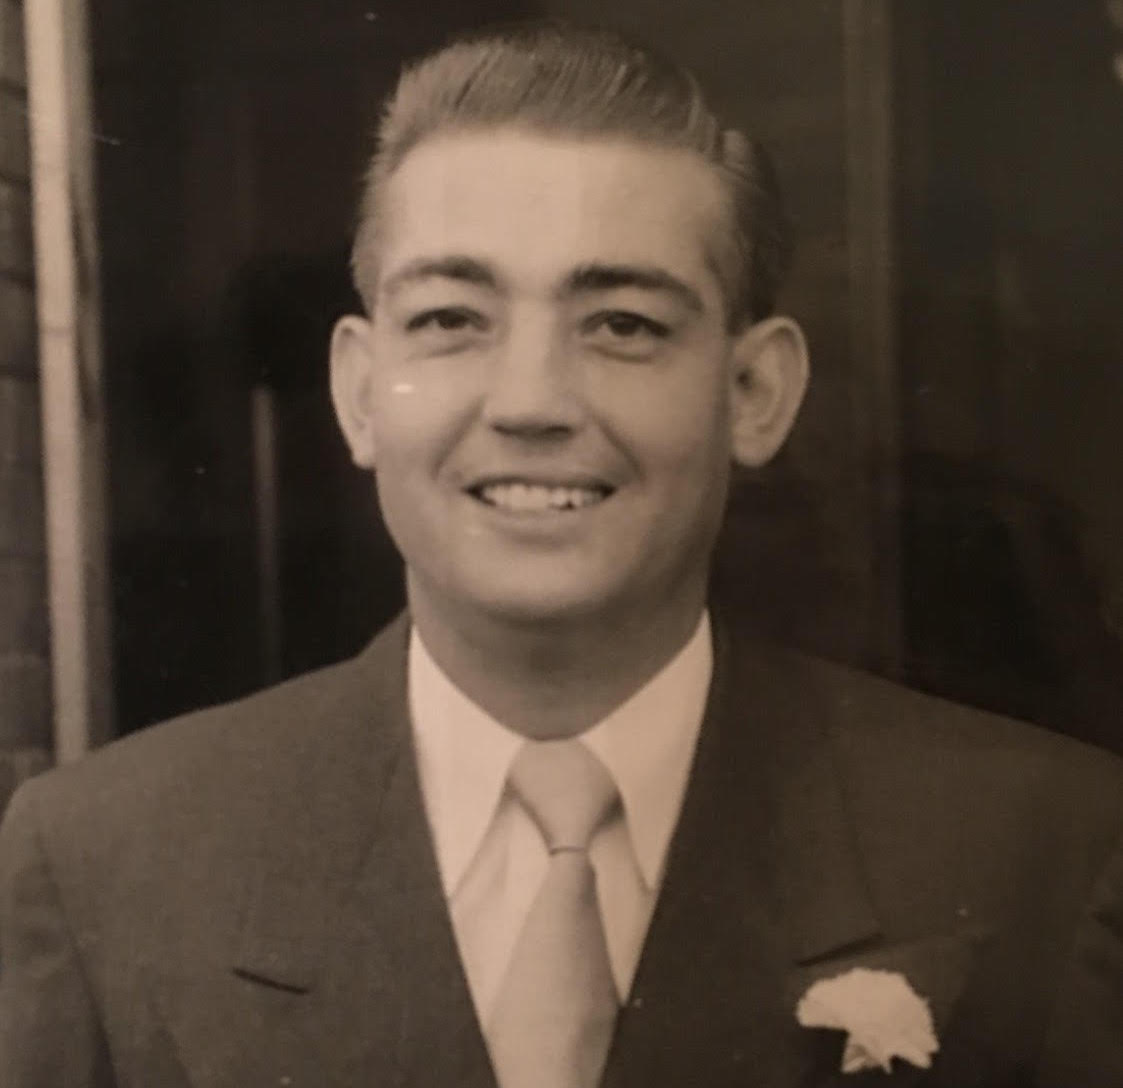 Black and white photo of adult man in a suit